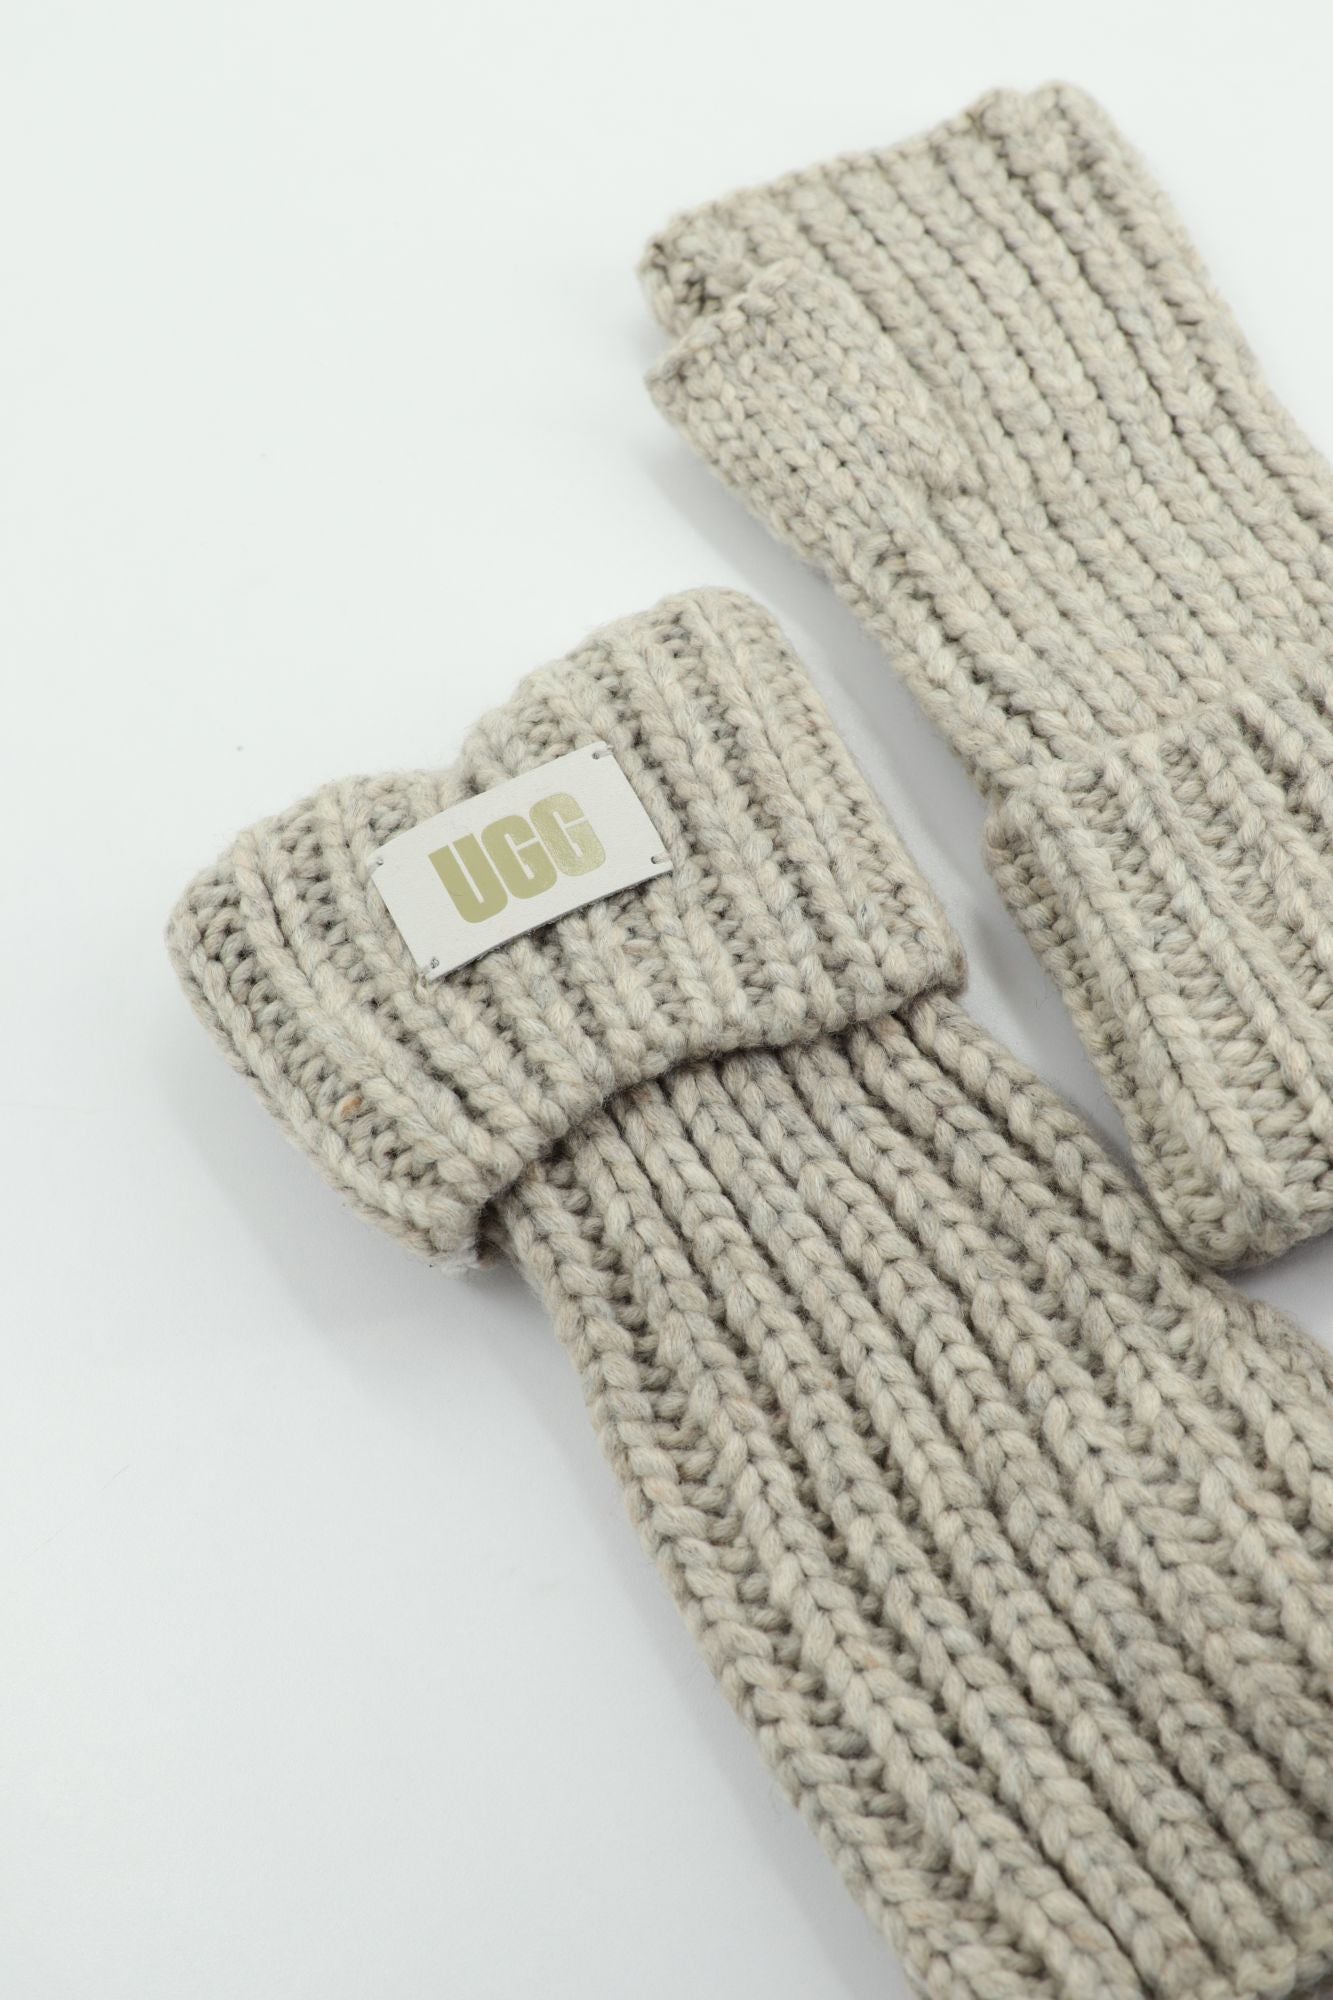 UGG CHUNKY FINGERLESS CUFF GLO en color GRIS (4)